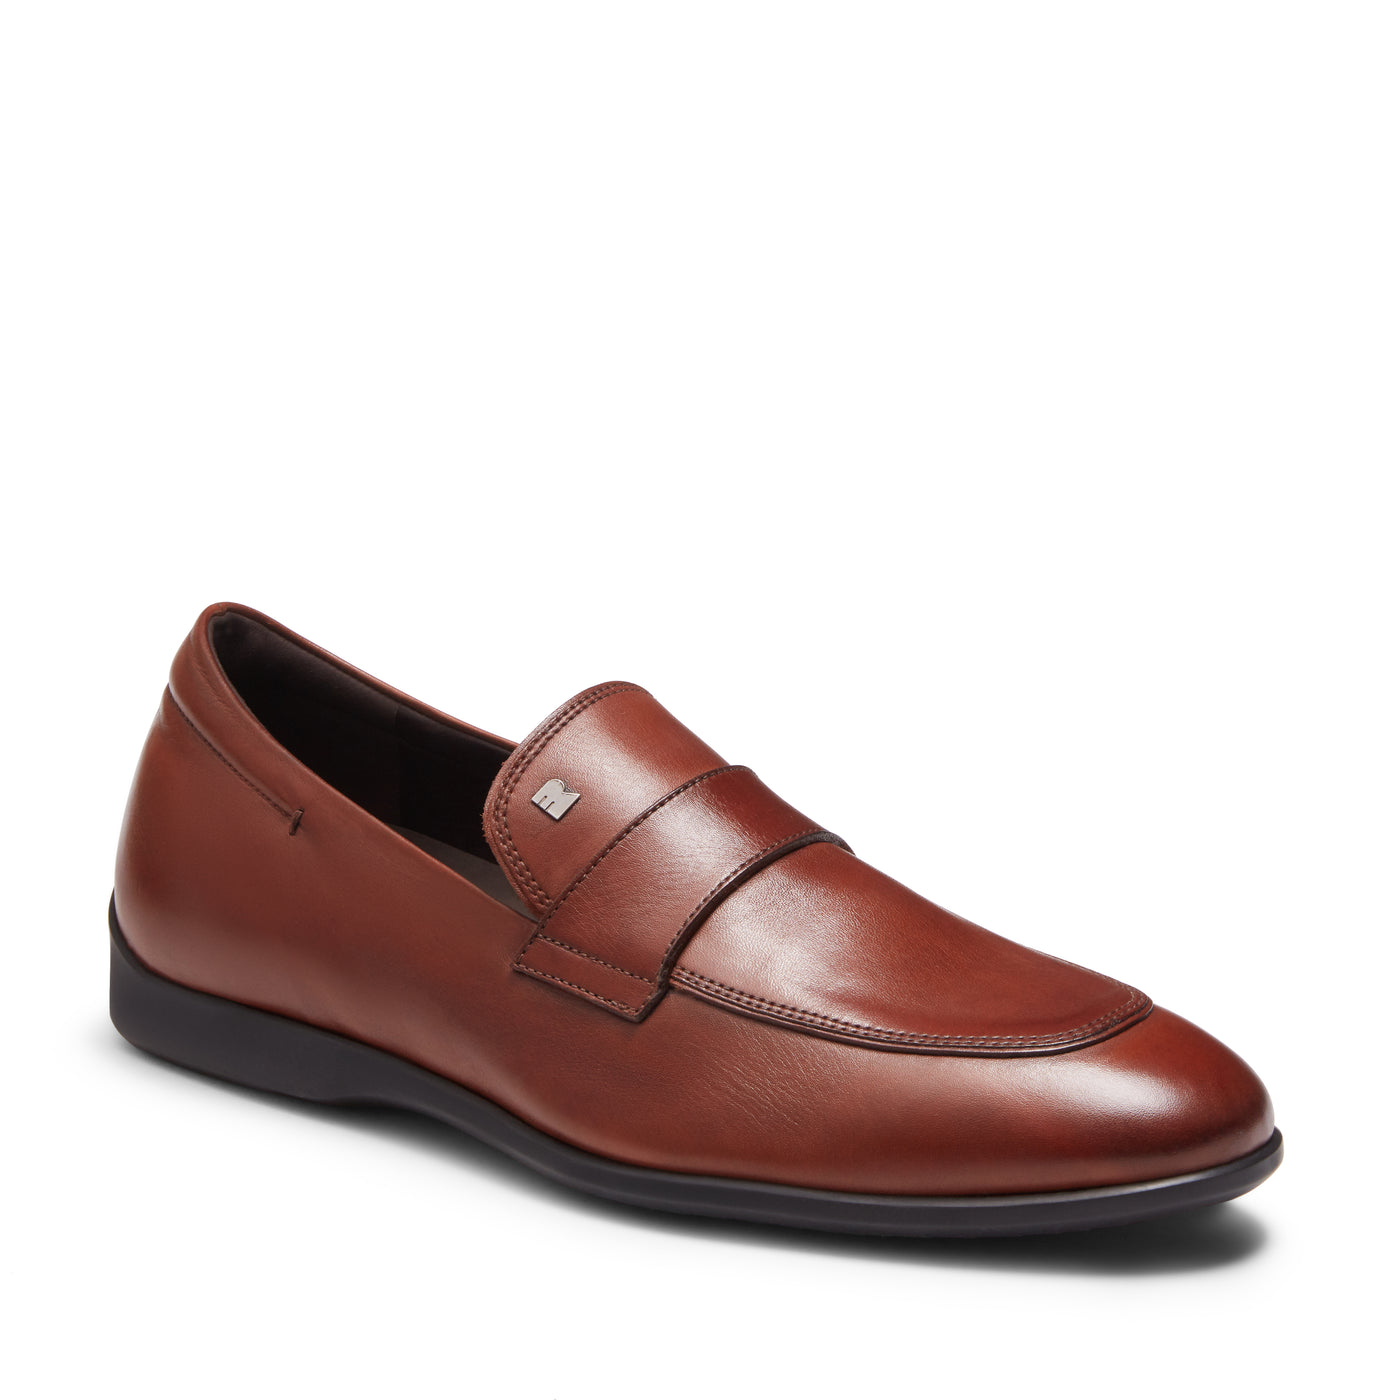 Shop The Latest Collection Of Fratelli Rossetti Fr M Trenton Loafer-44678 In Lebanon